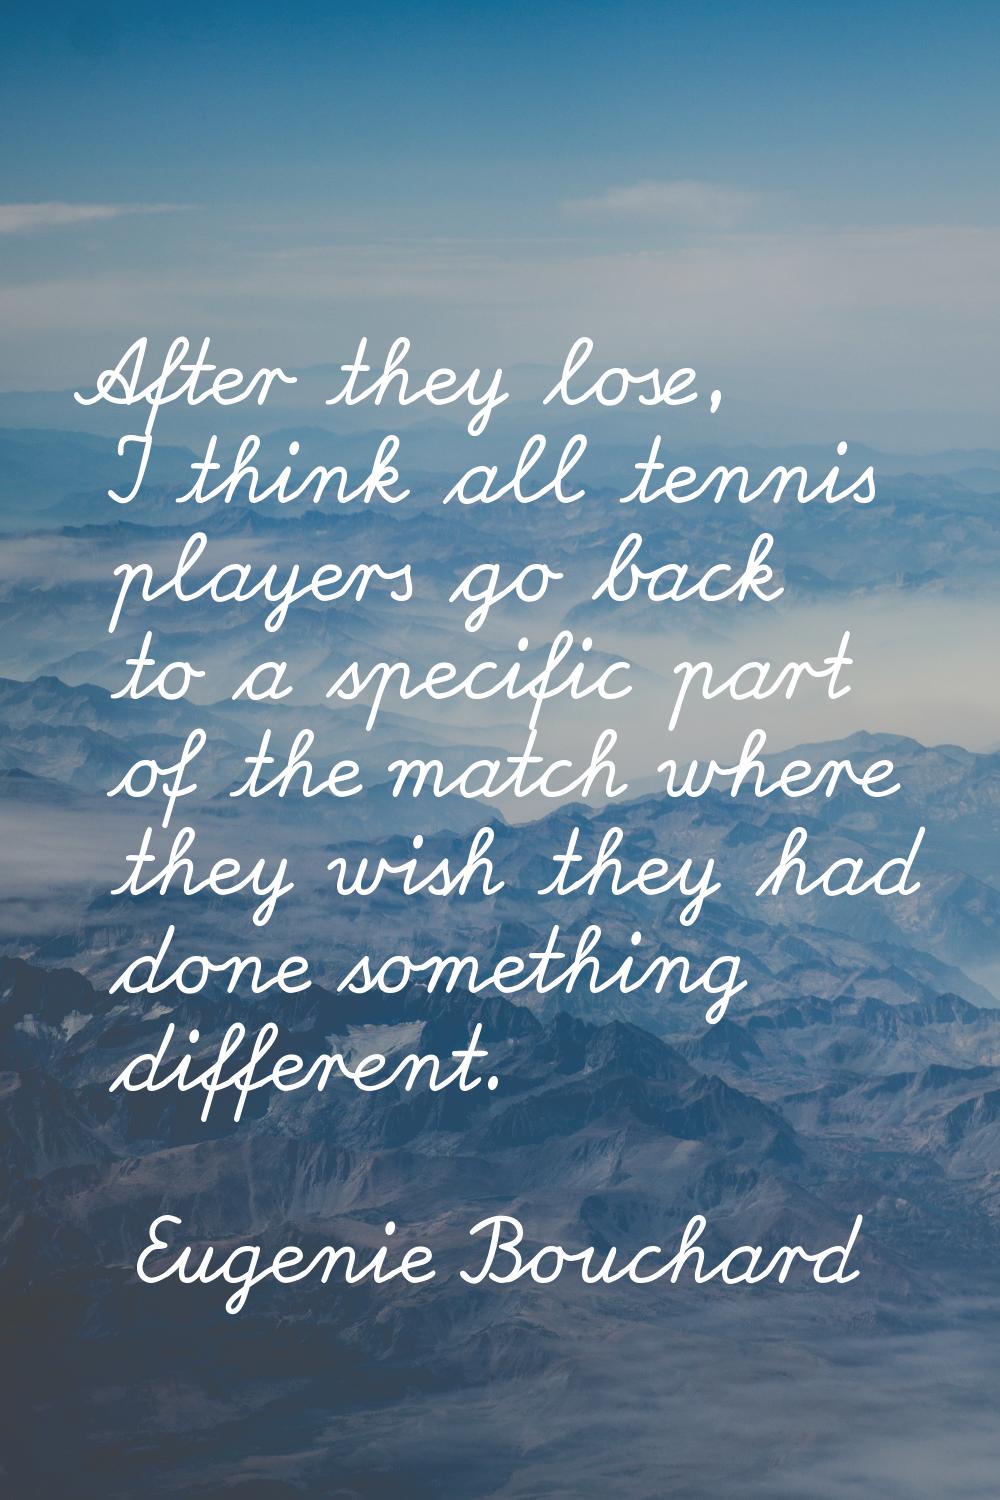 After they lose, I think all tennis players go back to a specific part of the match where they wish